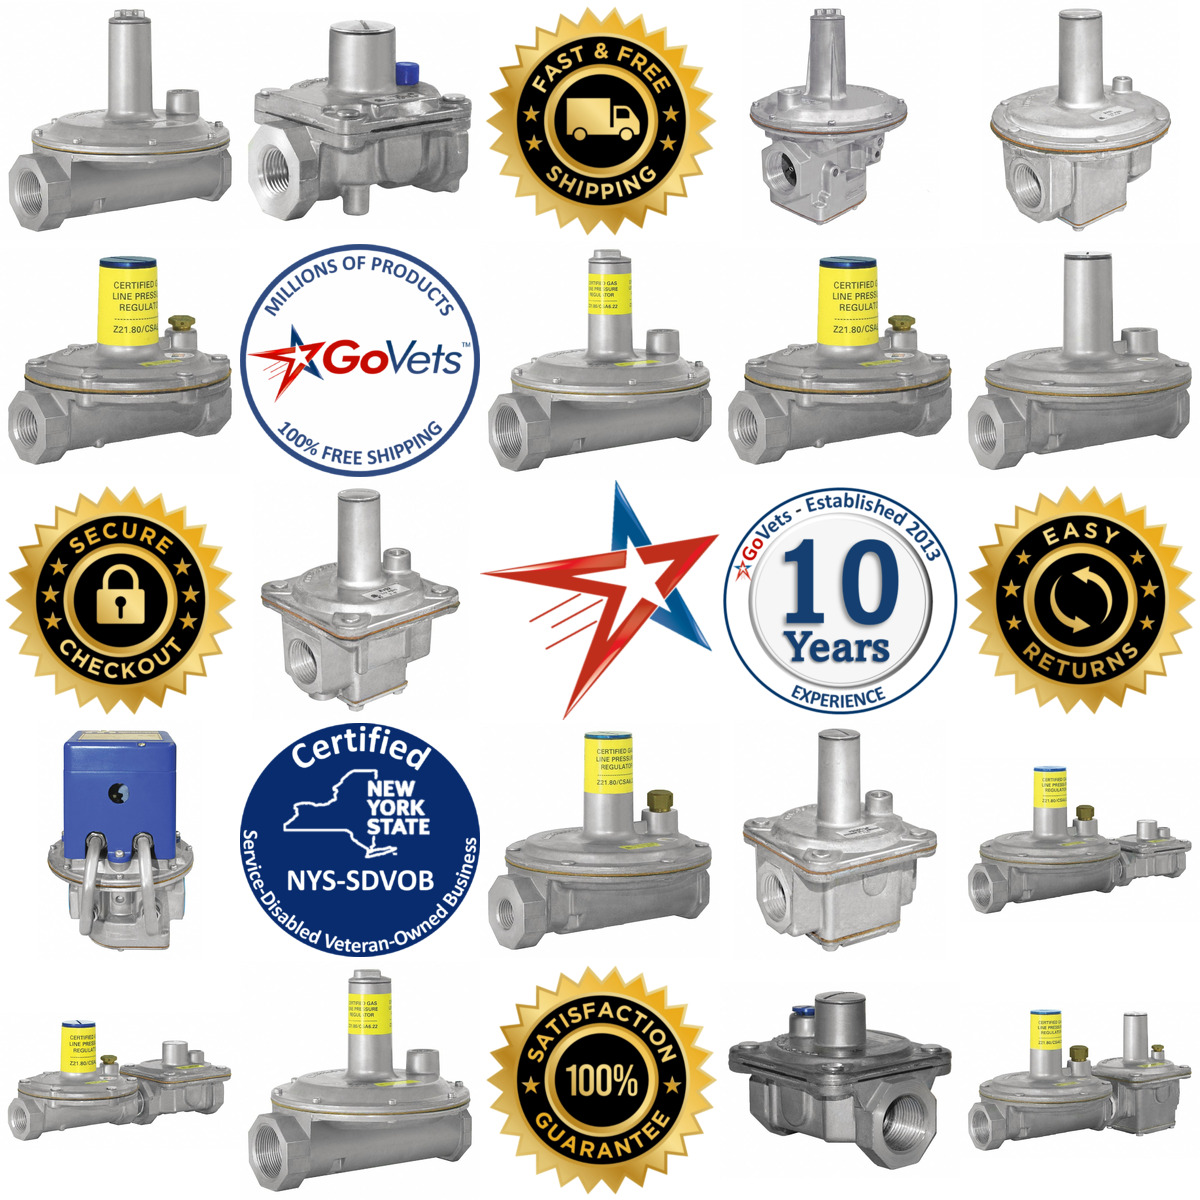 A selection of Gas Pressure Regulators products on GoVets